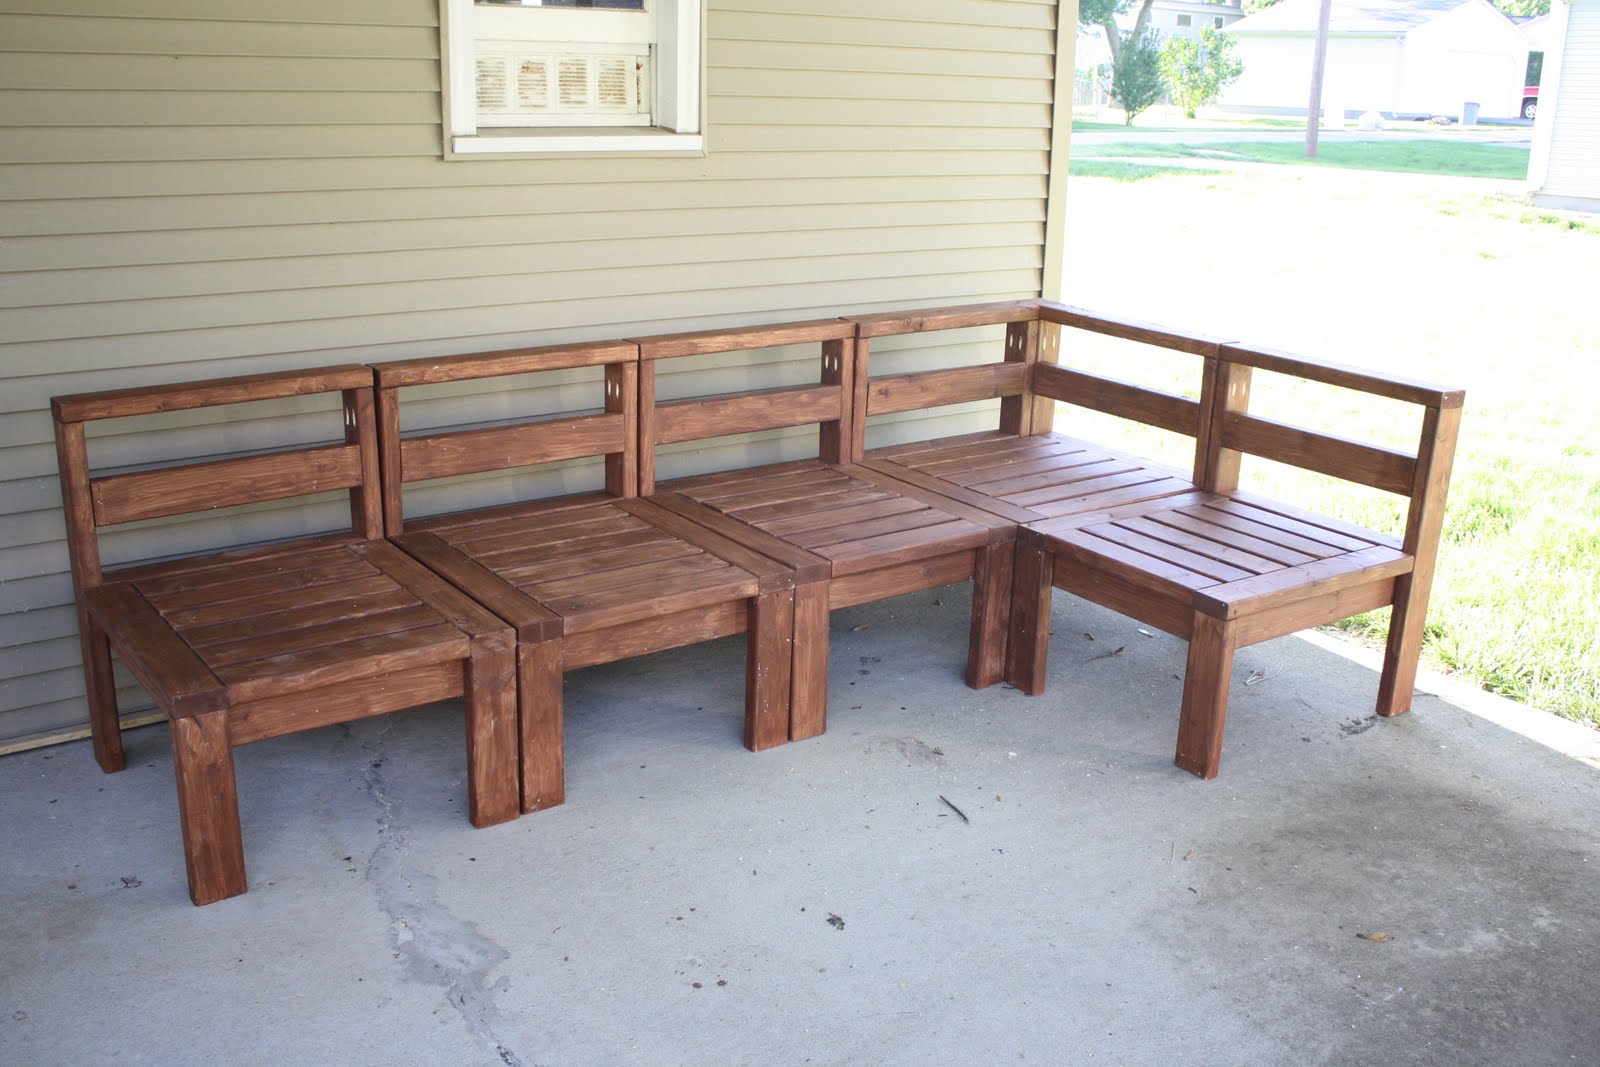 More Like Home: 2x4 Outdoor Sectional